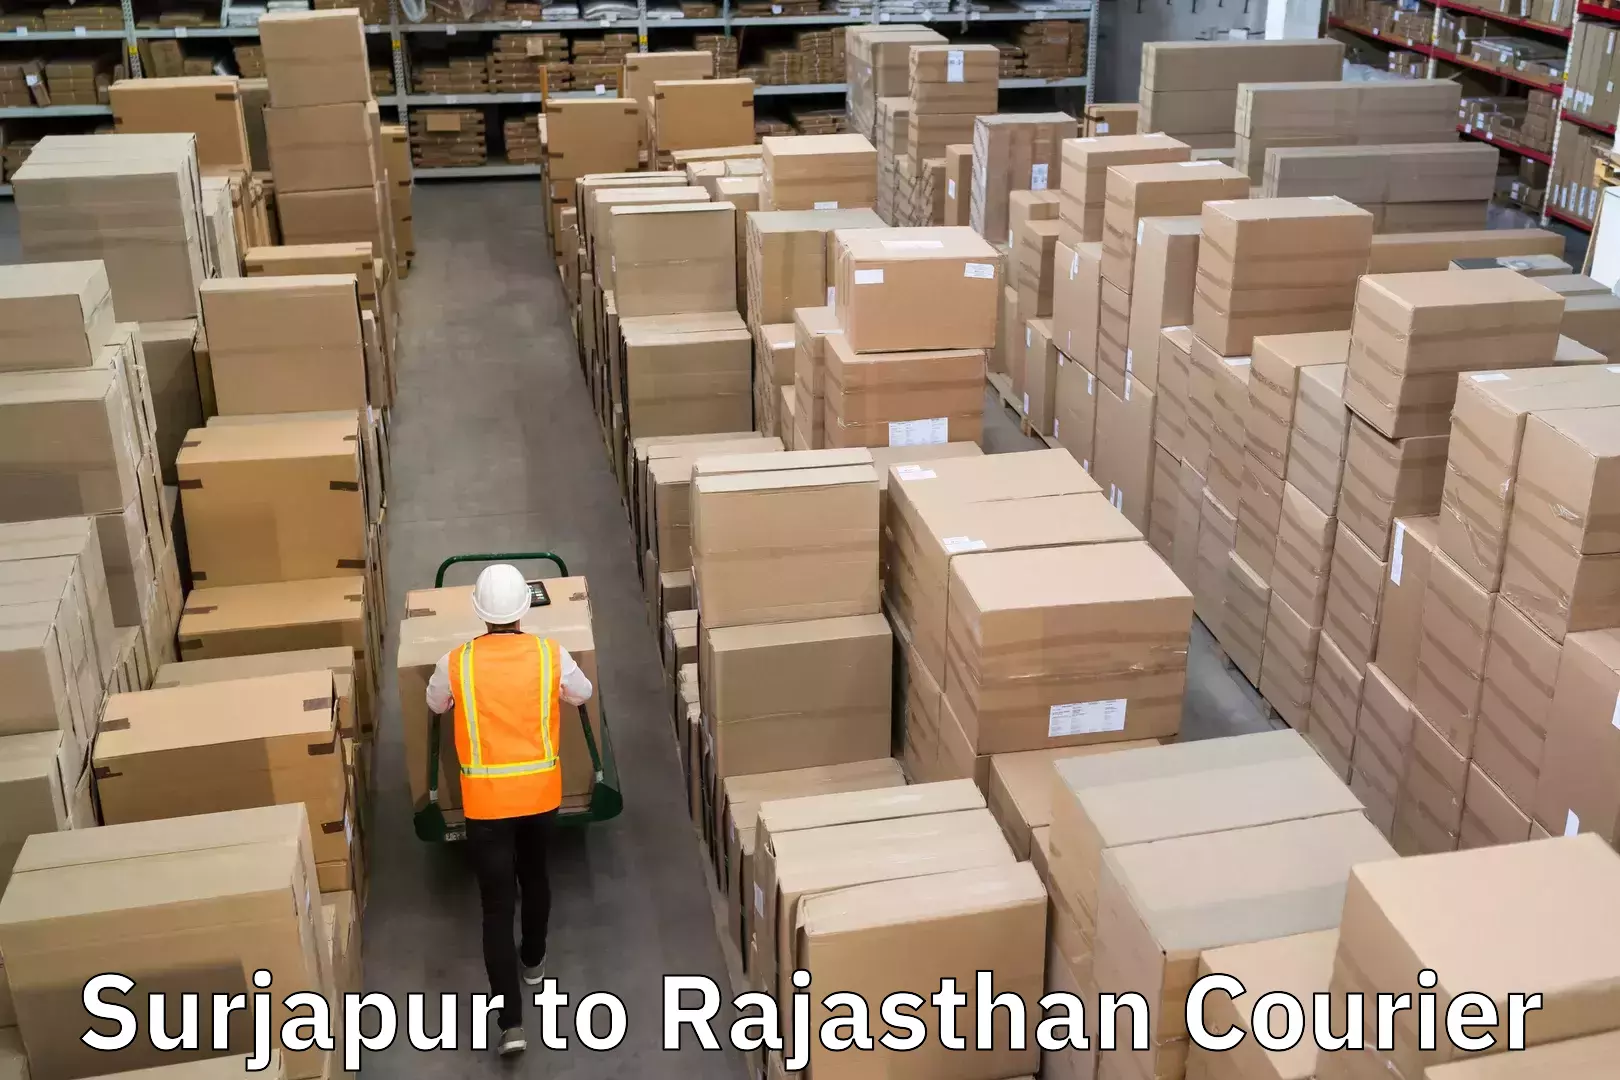 High-capacity parcel service Surjapur to Rajasthan